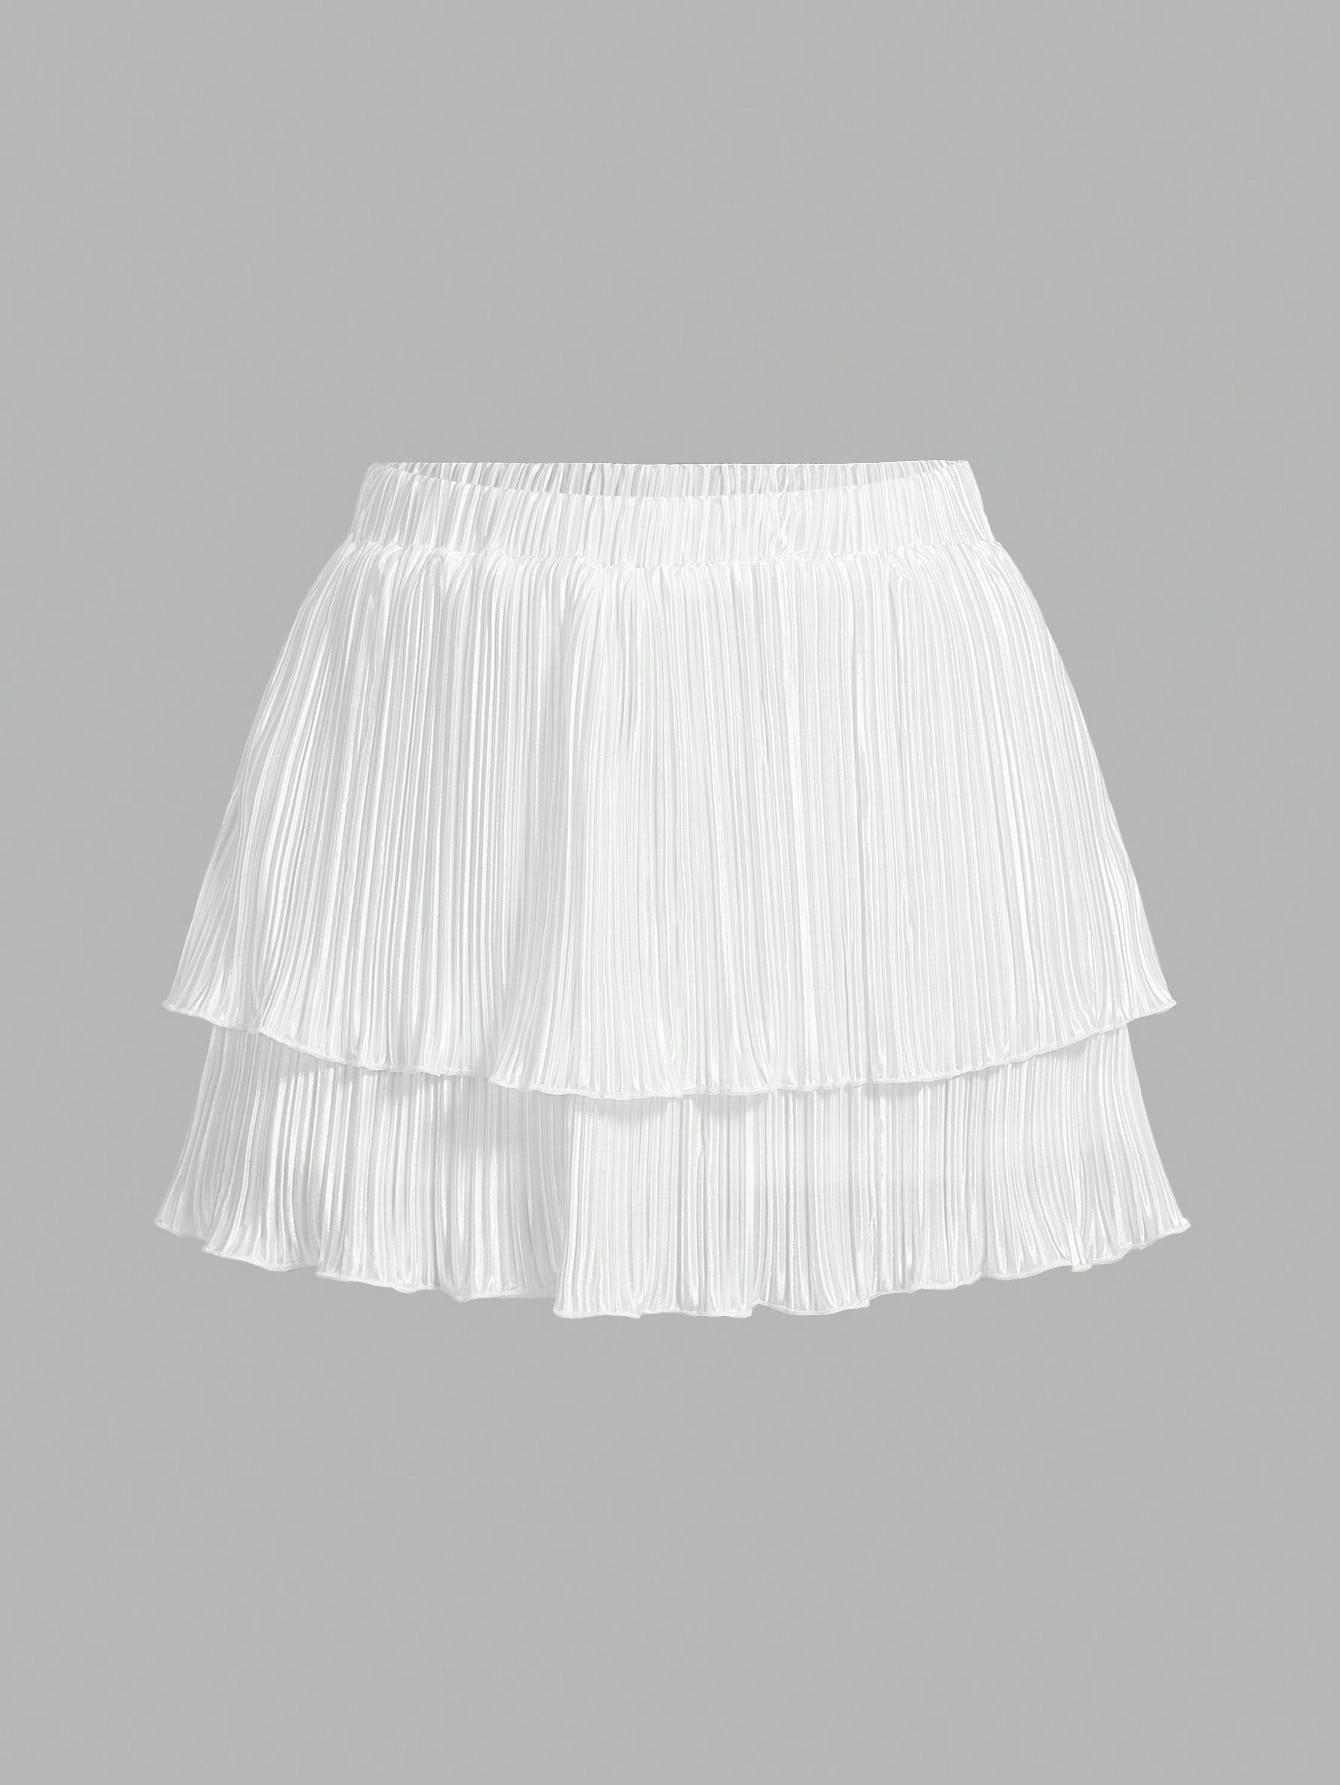 Women's Elegant Pleated Fabric Double-Layer Cake White Mini Skirt Is Suitable For Graduation Season, Dating, Vacation, Commuting, And Versatile For Daily Use